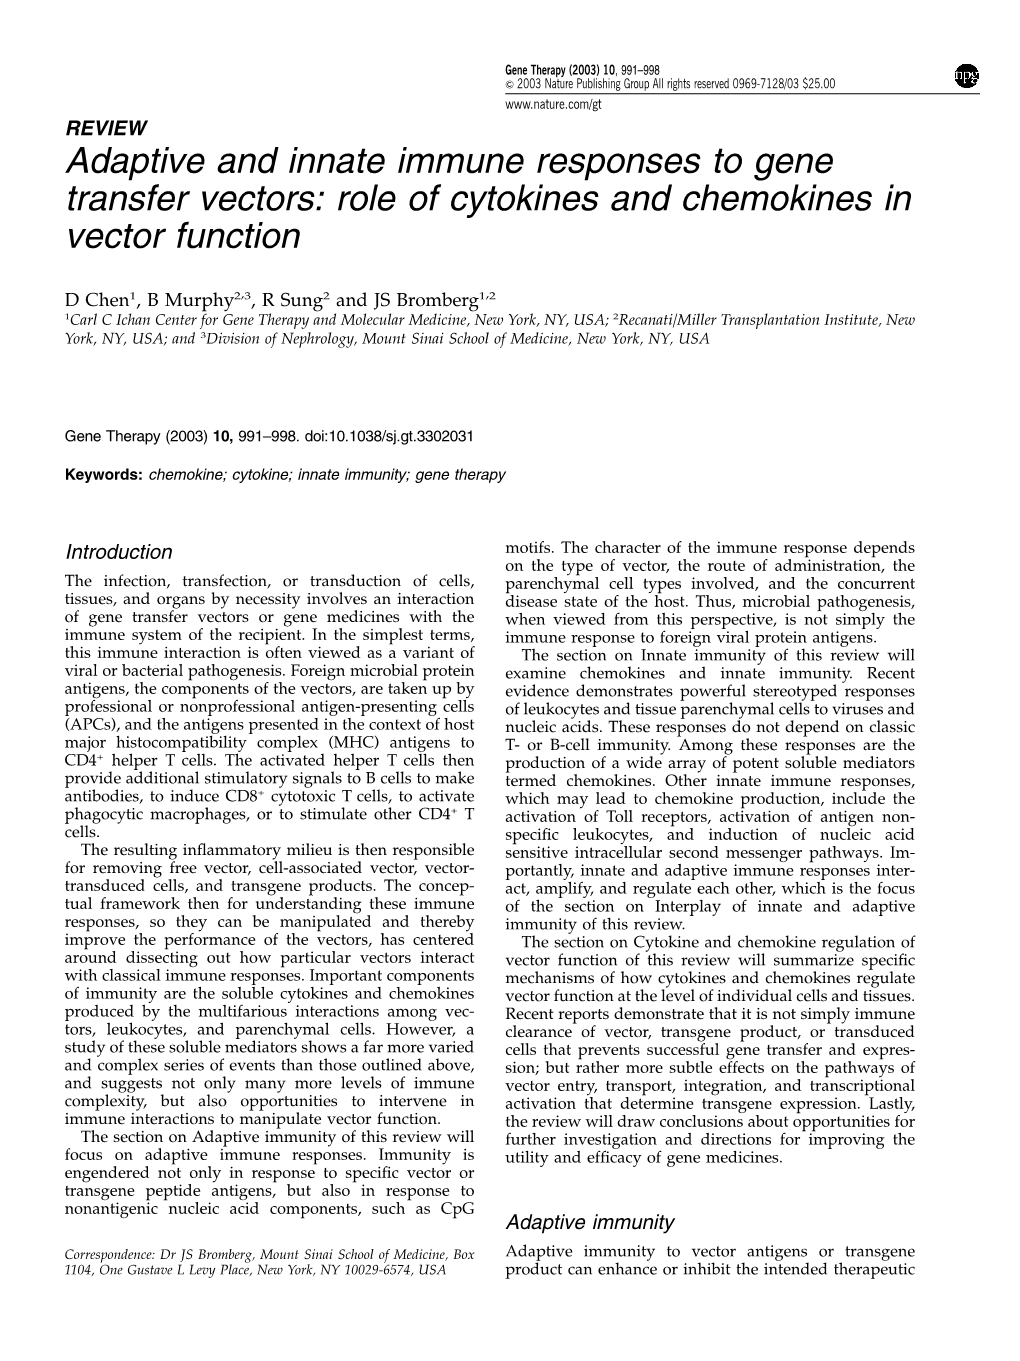 Adaptive and Innate Immune Responses to Gene Transfer Vectors: Role of Cytokines and Chemokines in Vector Function